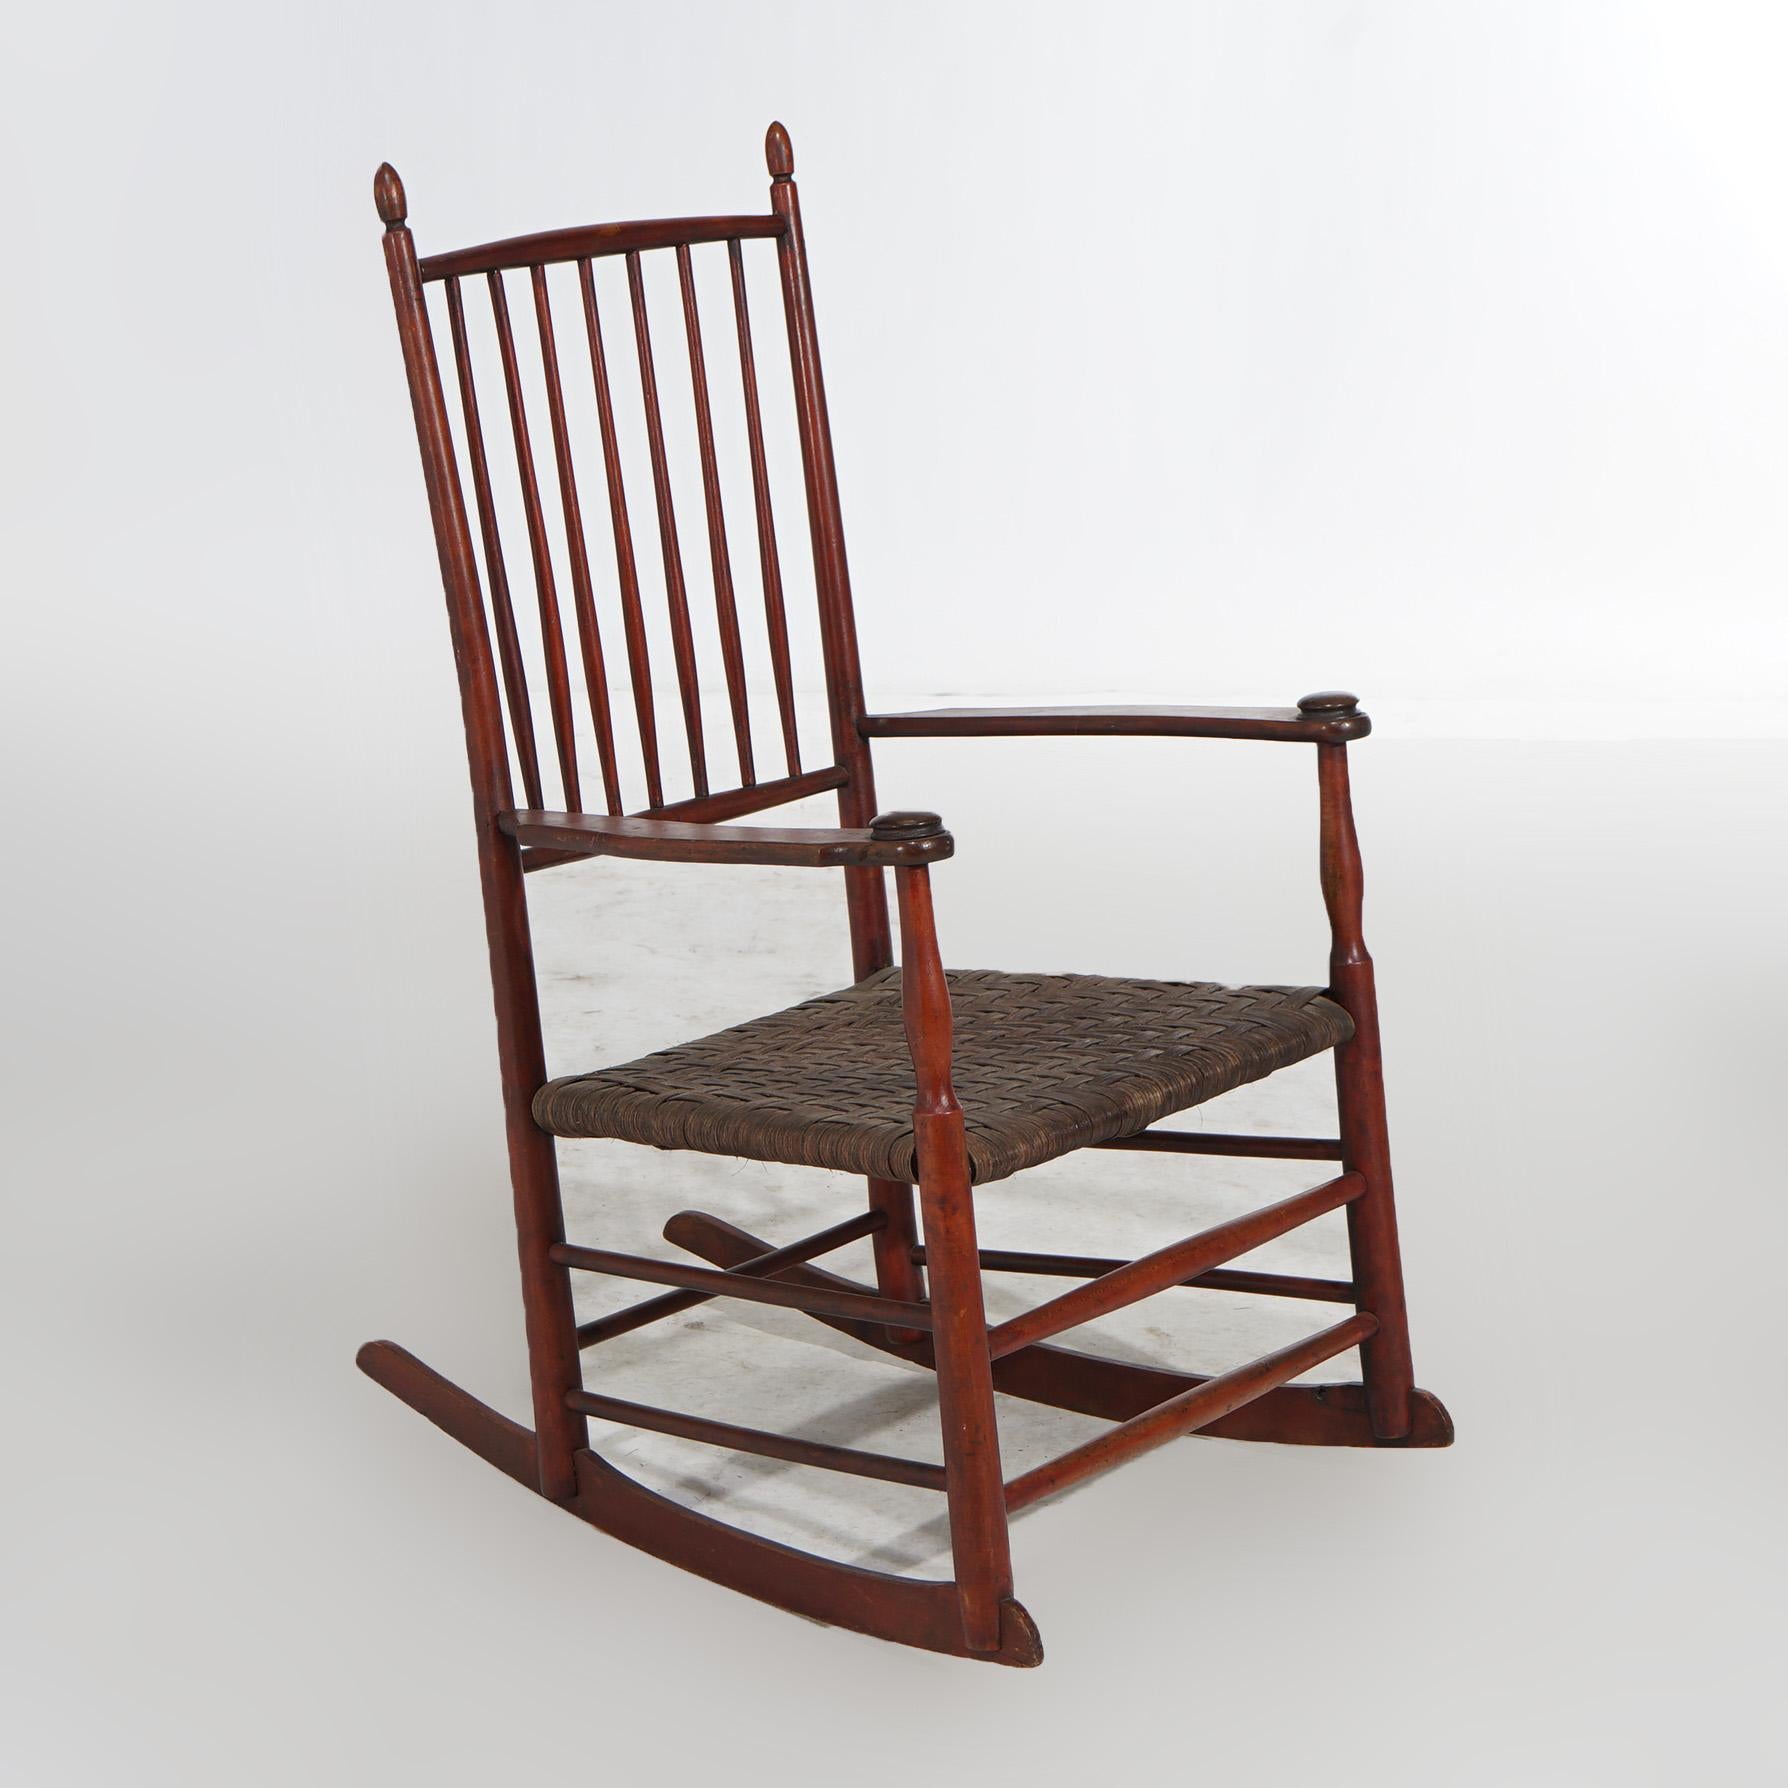 Wood Antique Shaker Rocking Chair with Thatch Rush Seat, 19th C